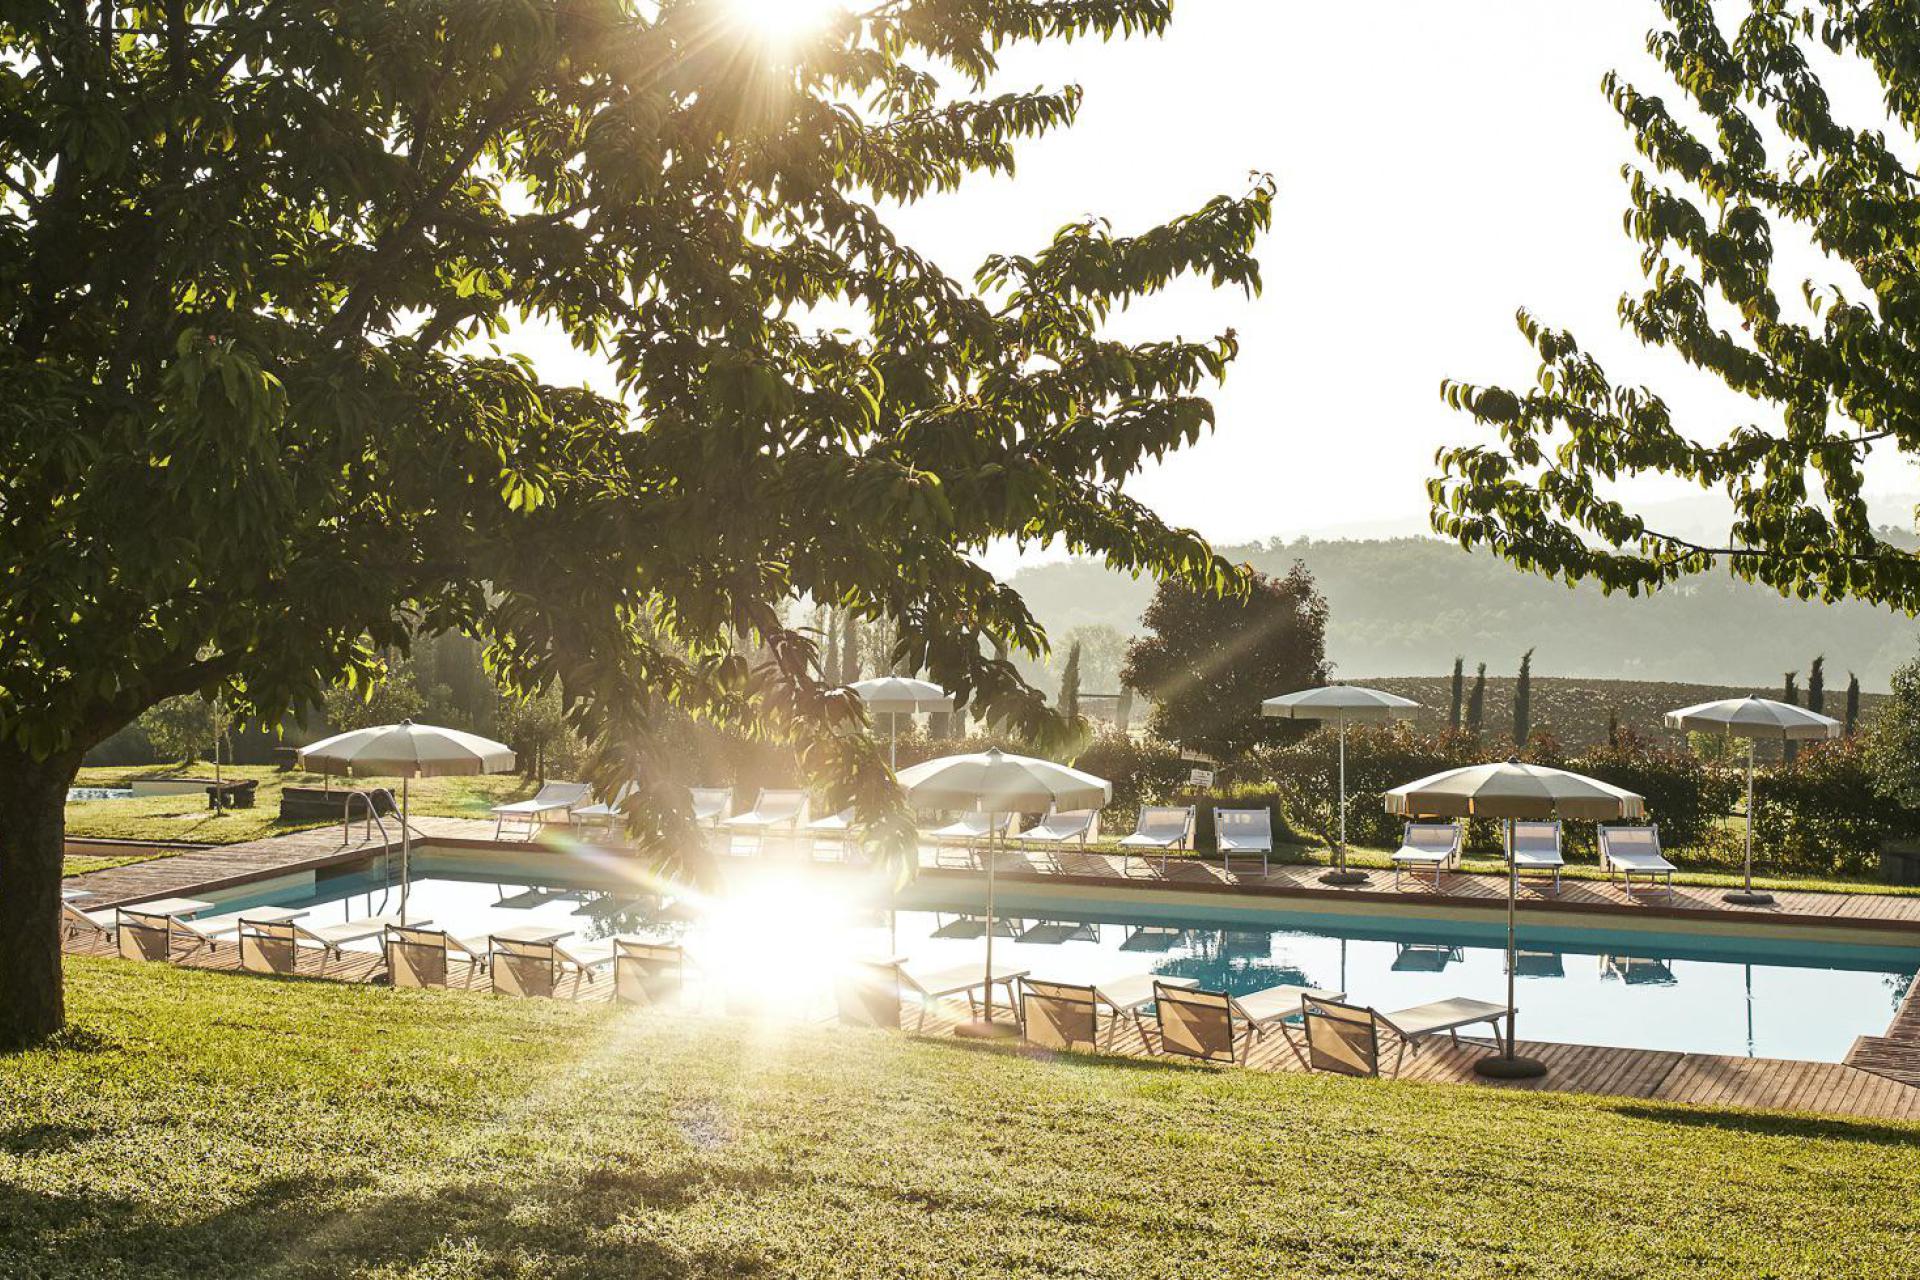 Family-friendly agriturismo centrally located in Tuscany